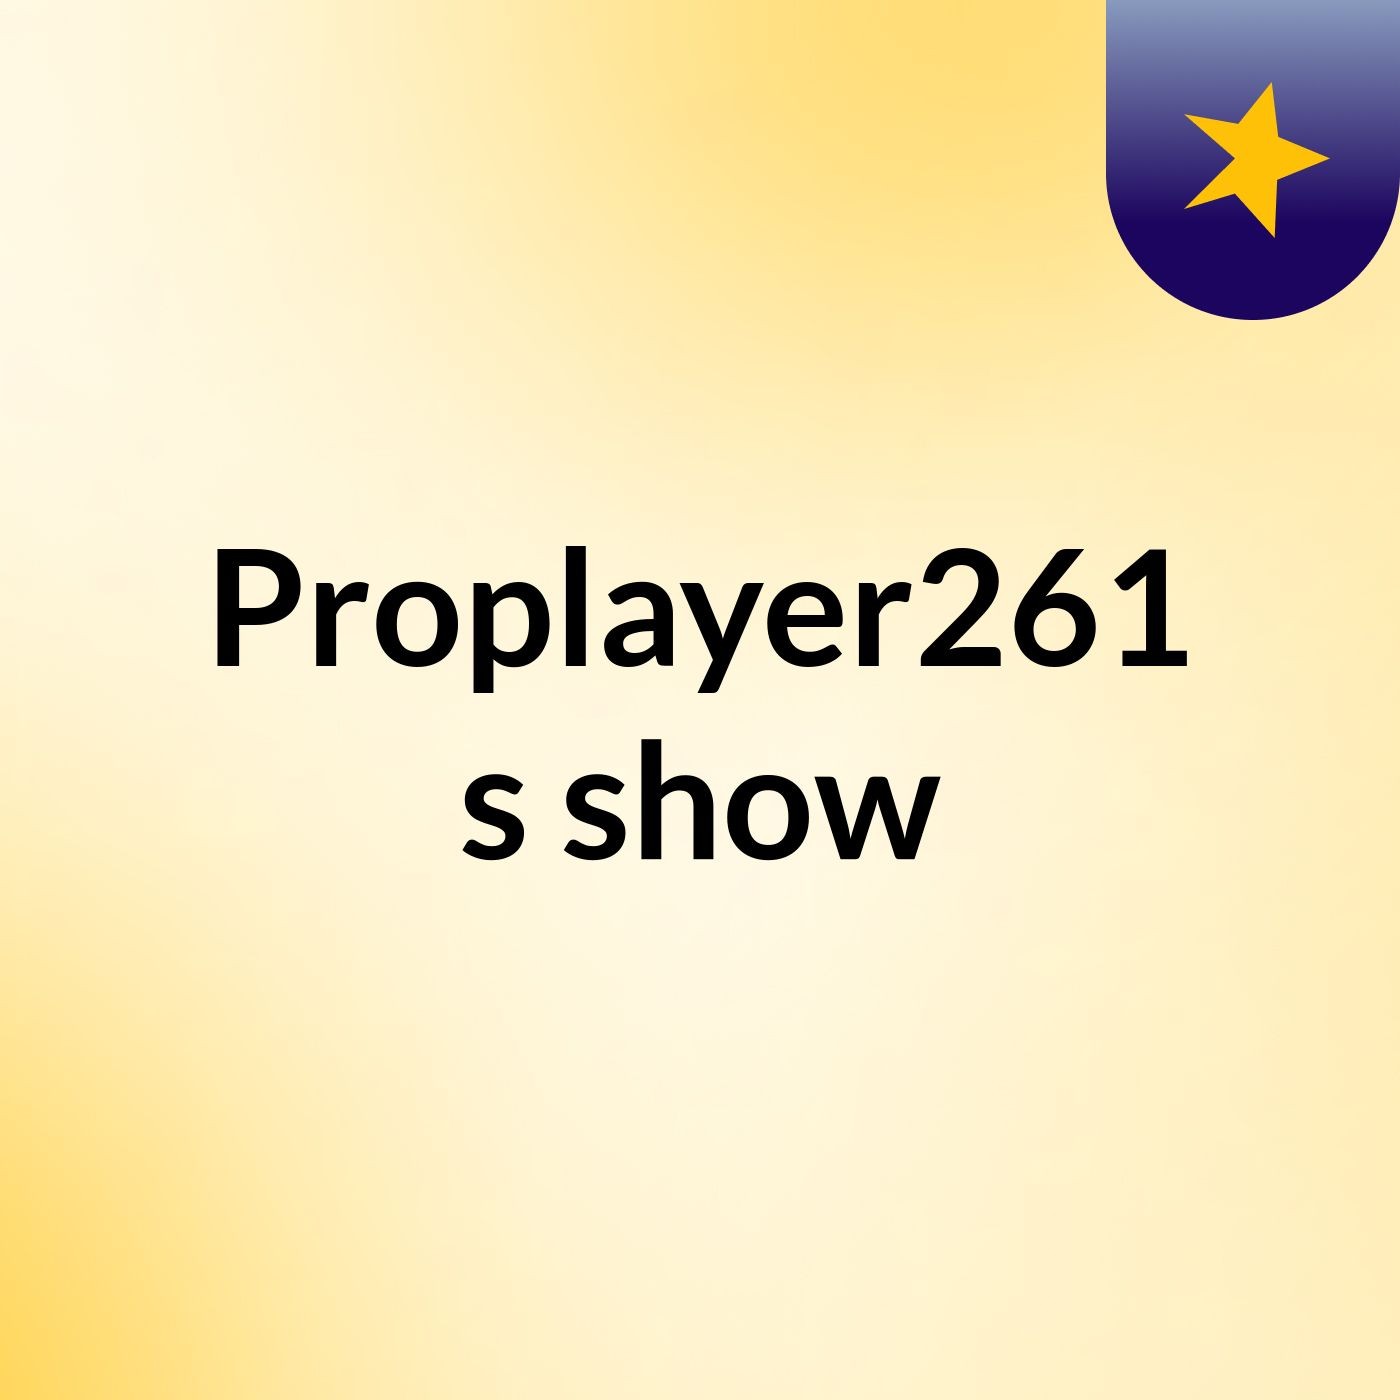 Proplayer261's show